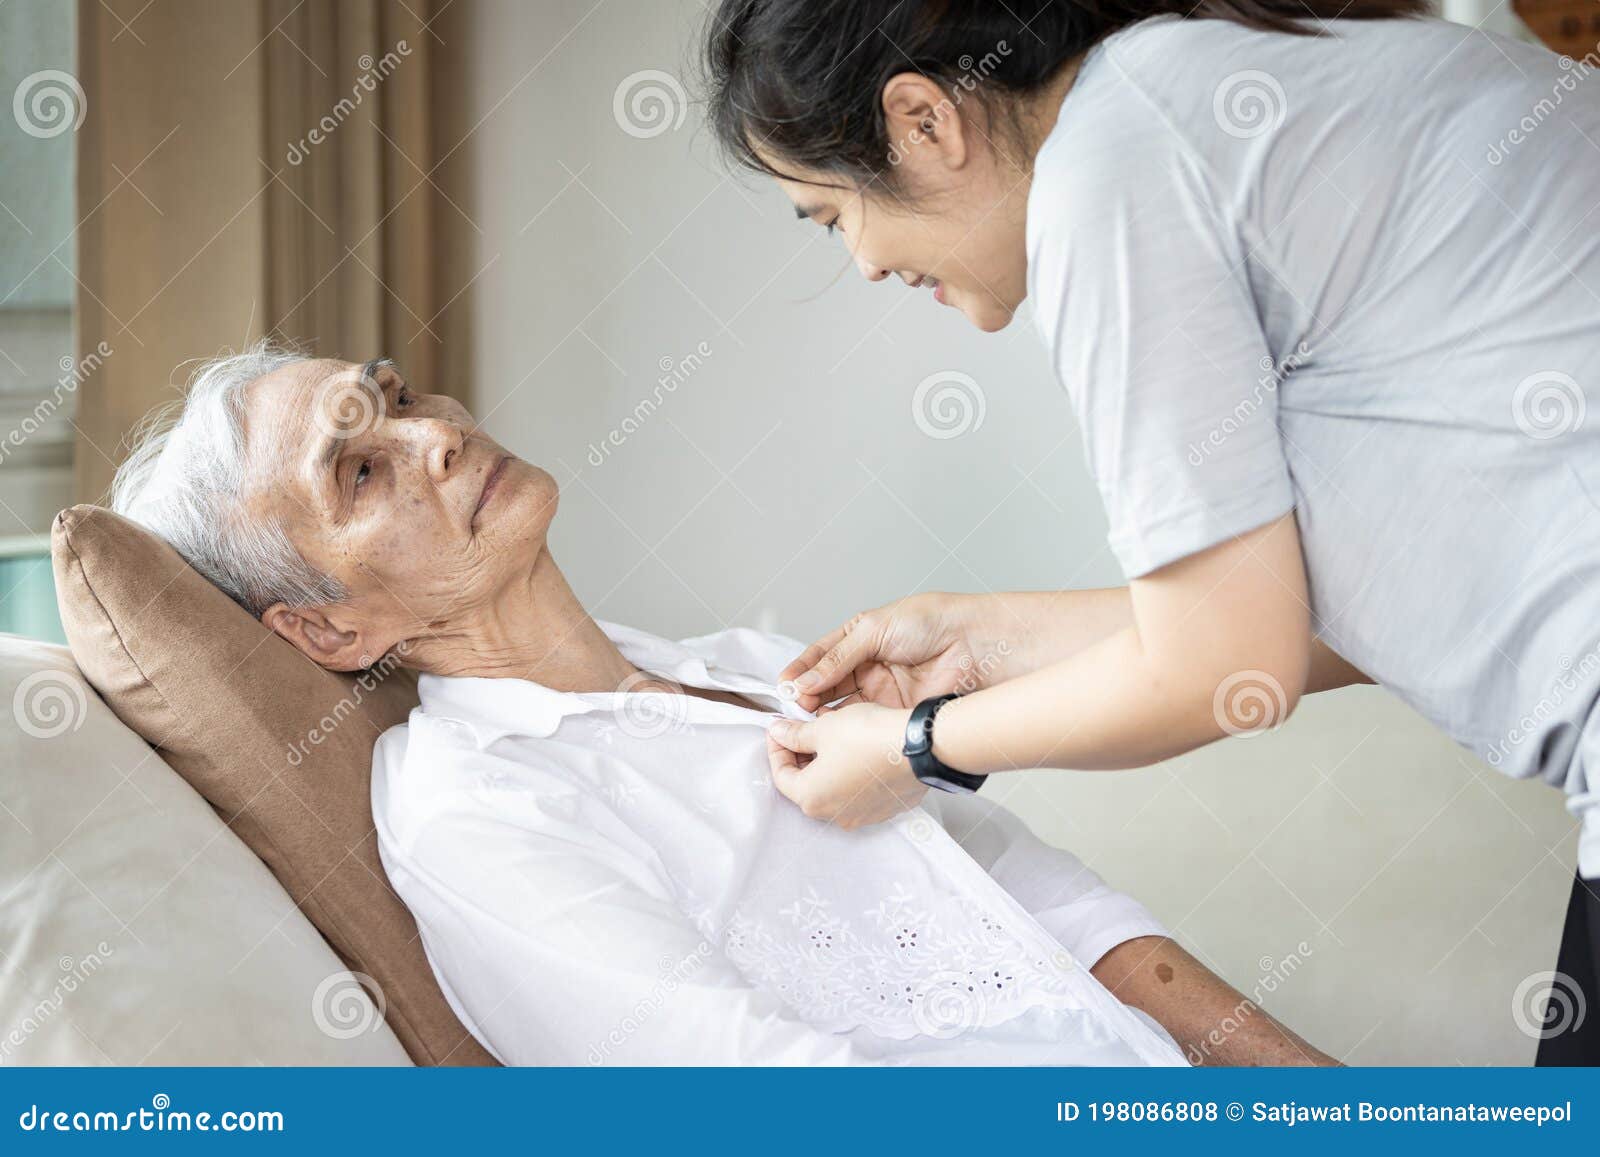 asian female caregiver taking care of helping elderly patient get dressed,button on the shirt or changing clothes for a paralyzed